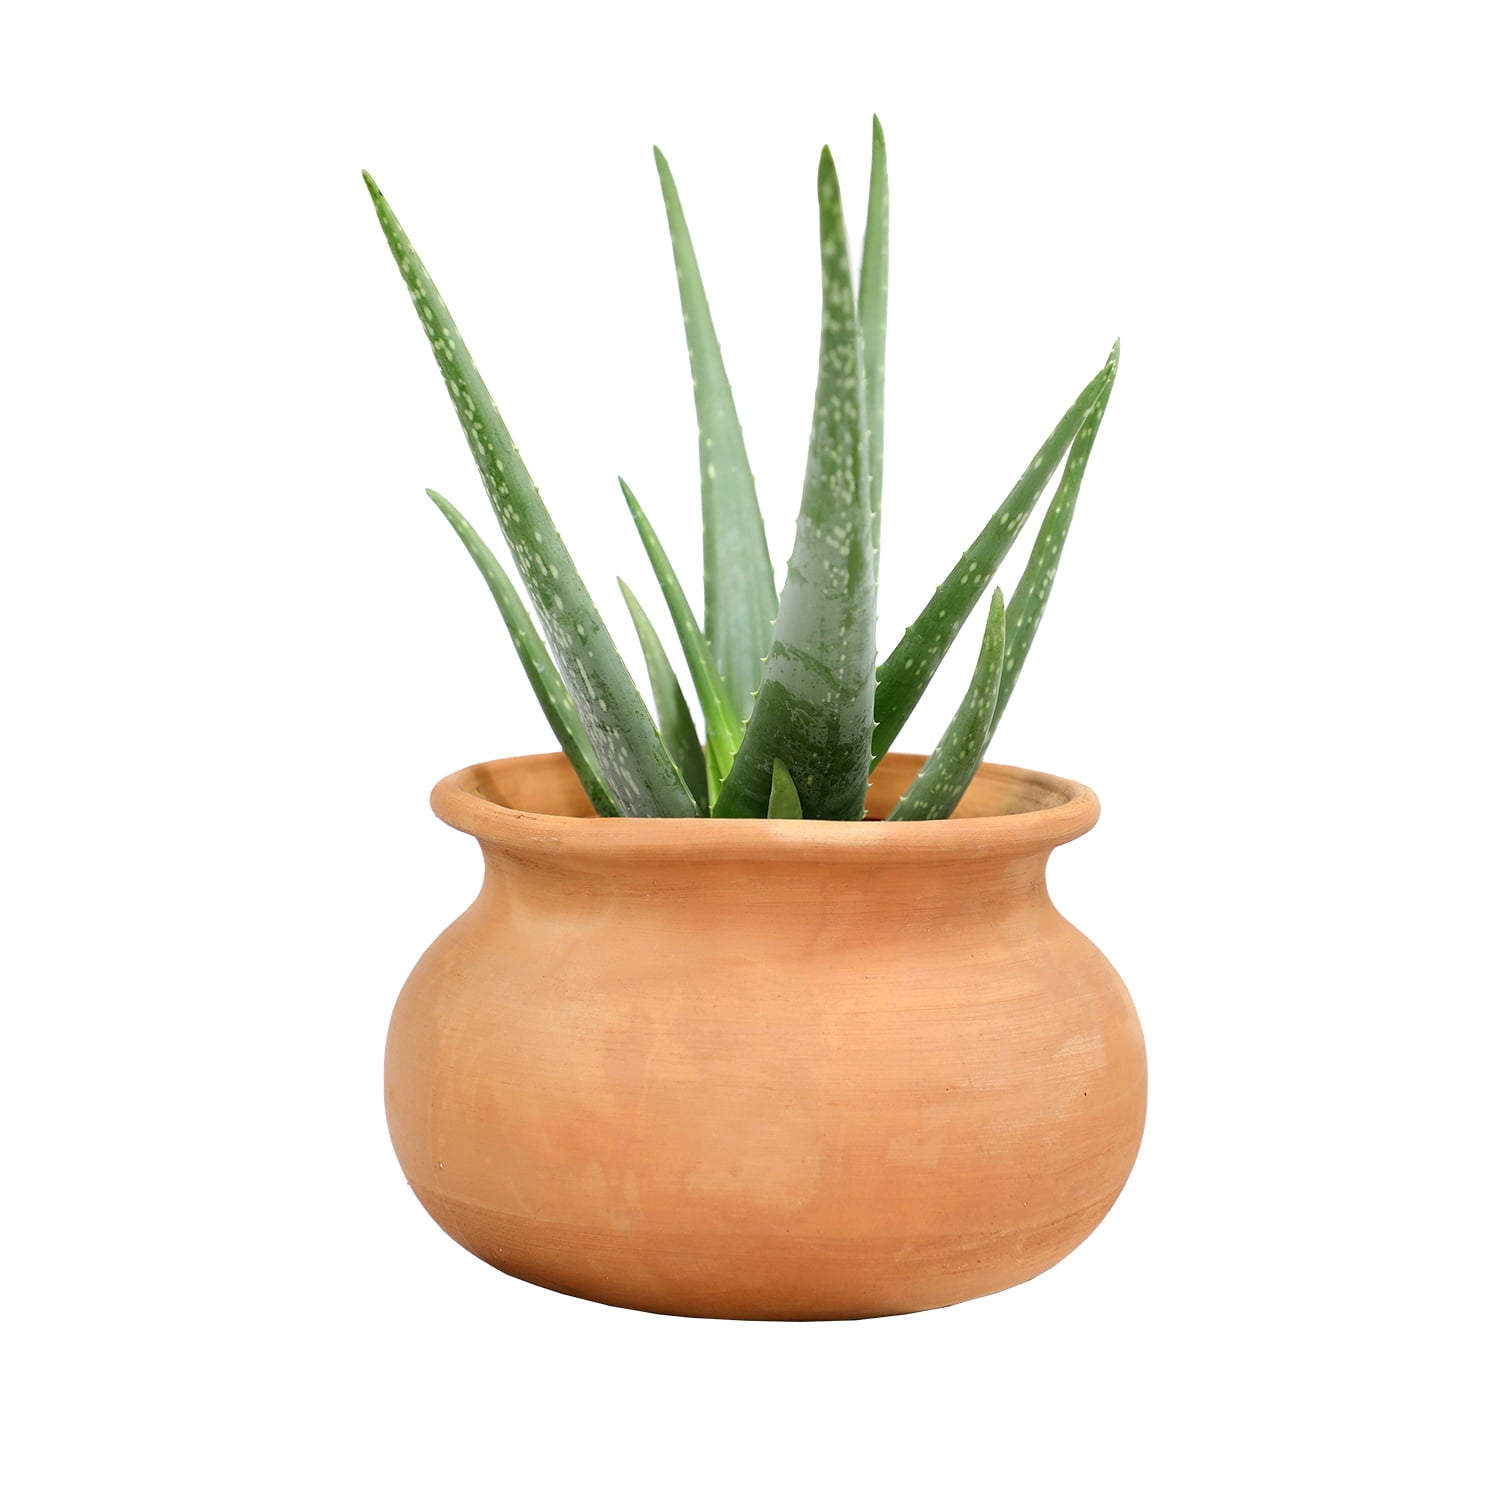 Element by Altman Plants Aloe Vera Succulent ， Live Indoor House Plant with Grower Pot， 6 Inch